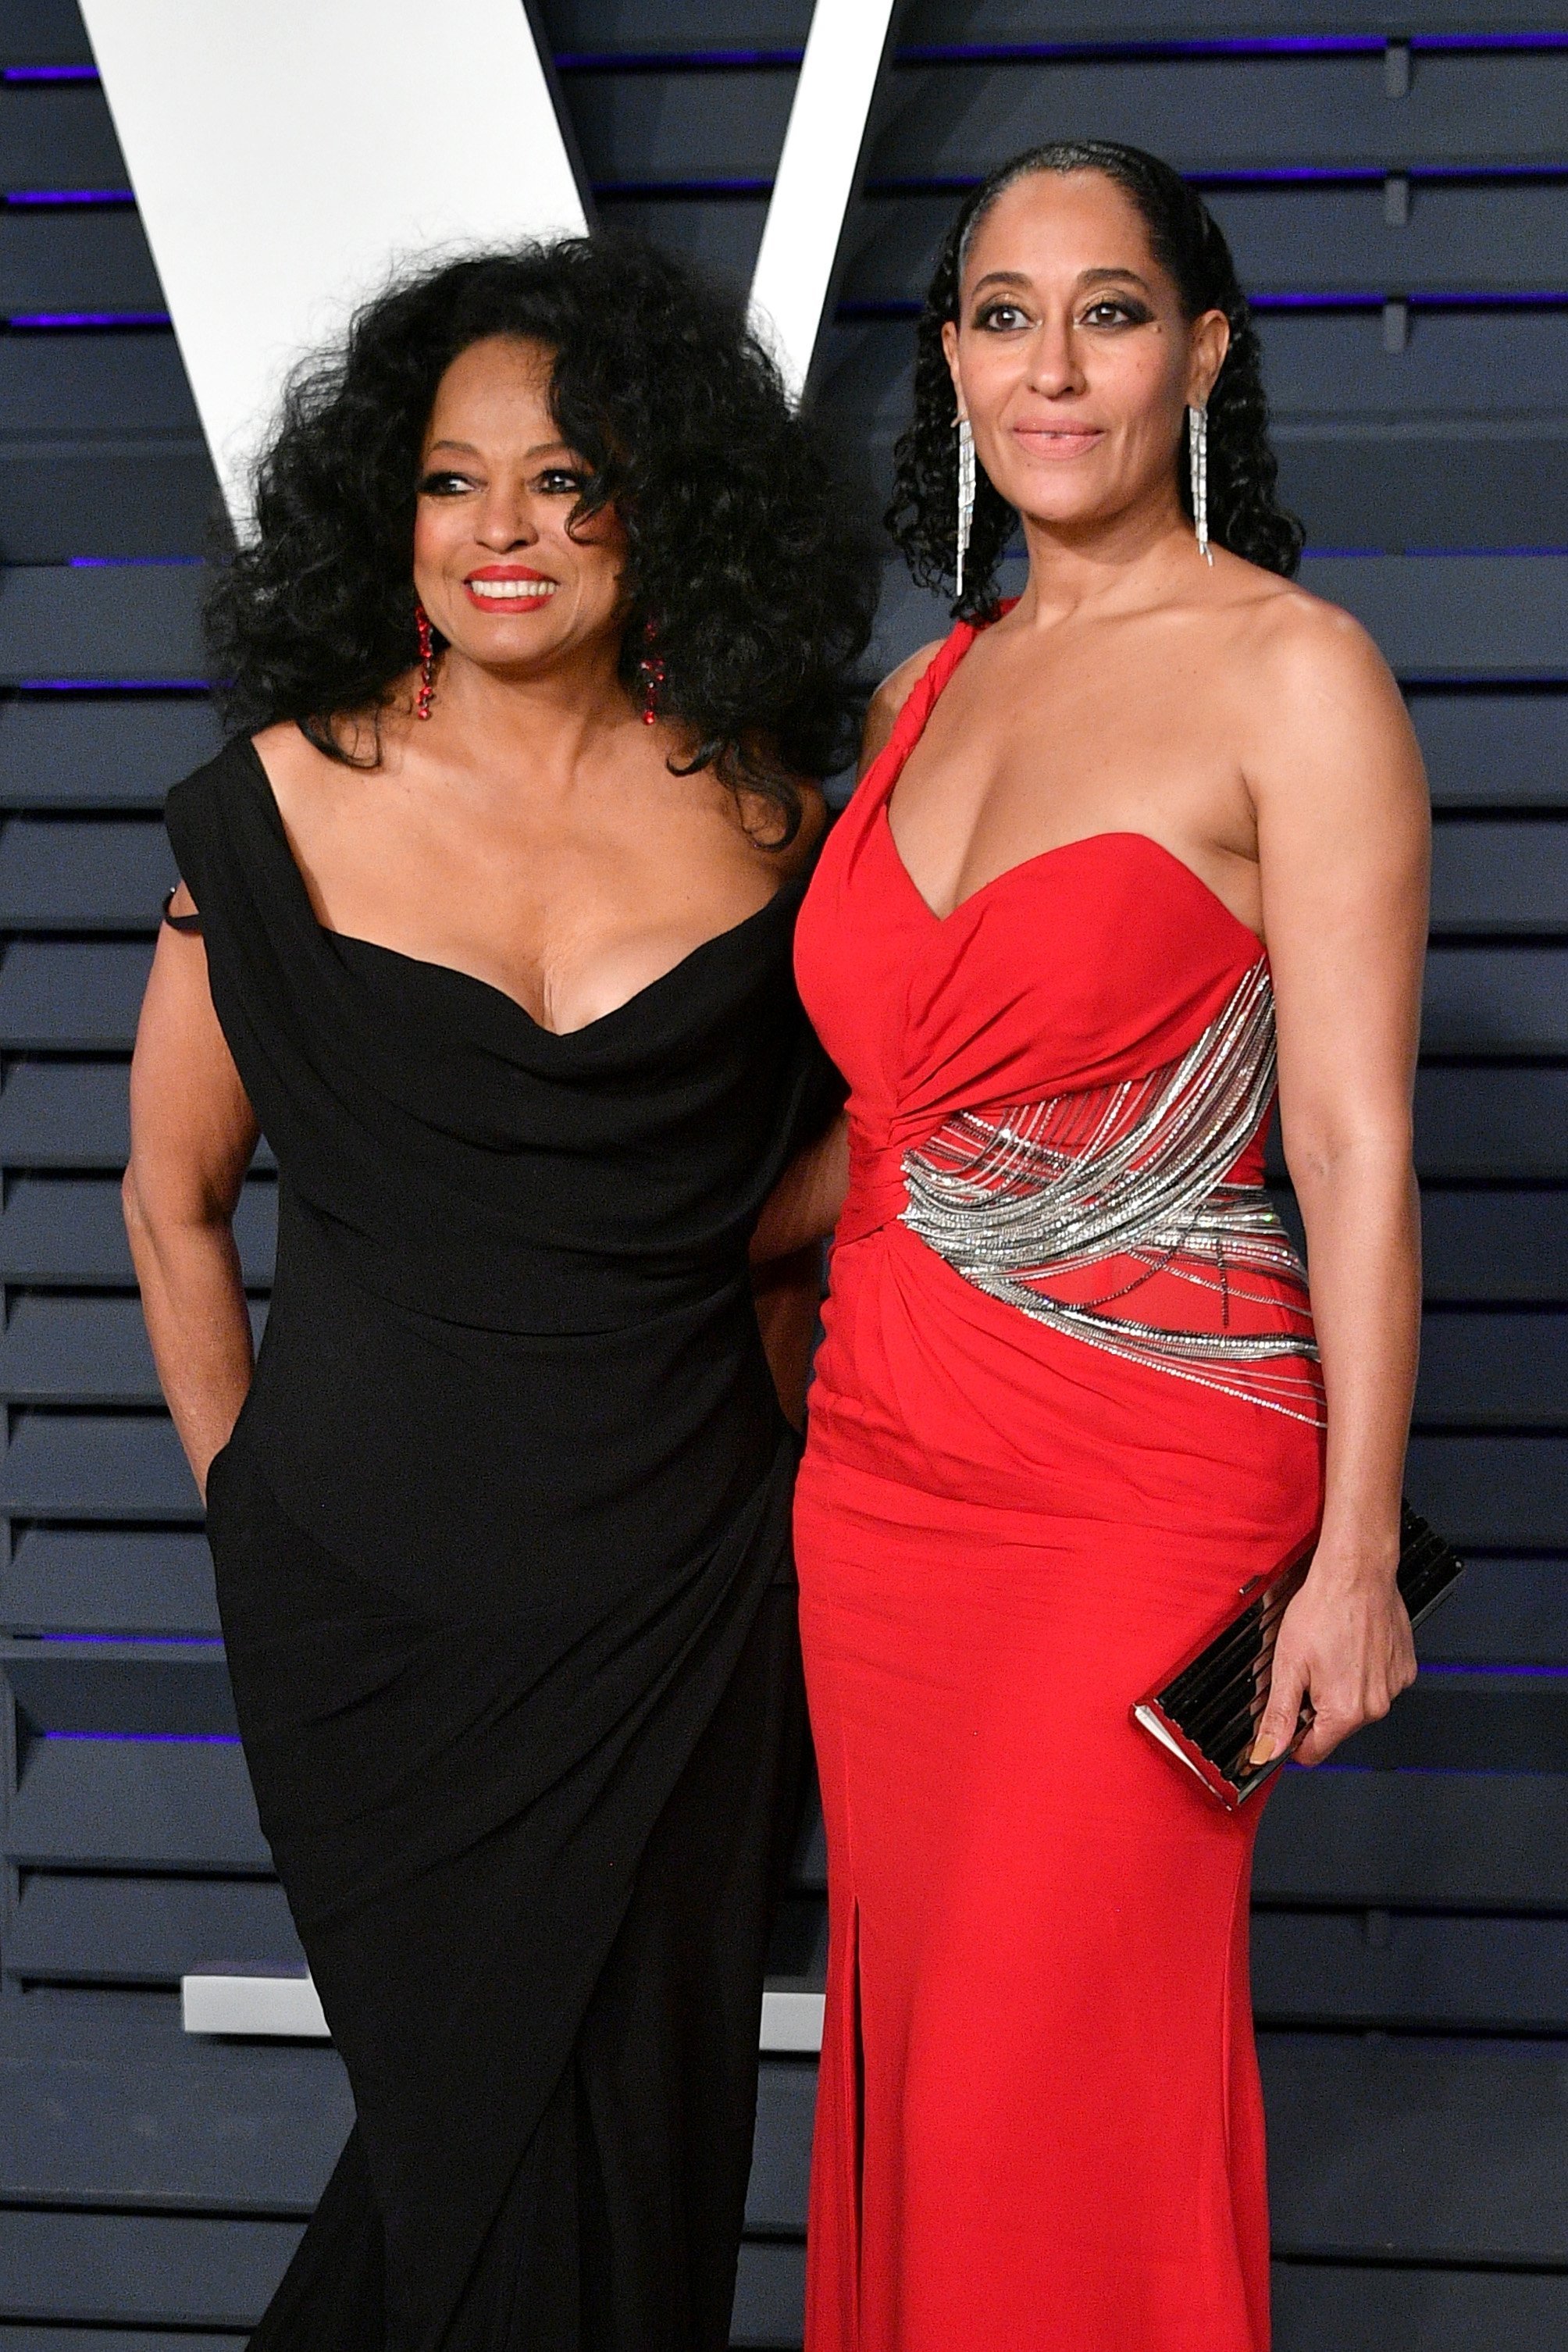 Diana Ross and Tracee Ellis Ross attend the Vanity Fair Oscar Party in Beverly Hills, California in February 2019 | Photo: Getty Images